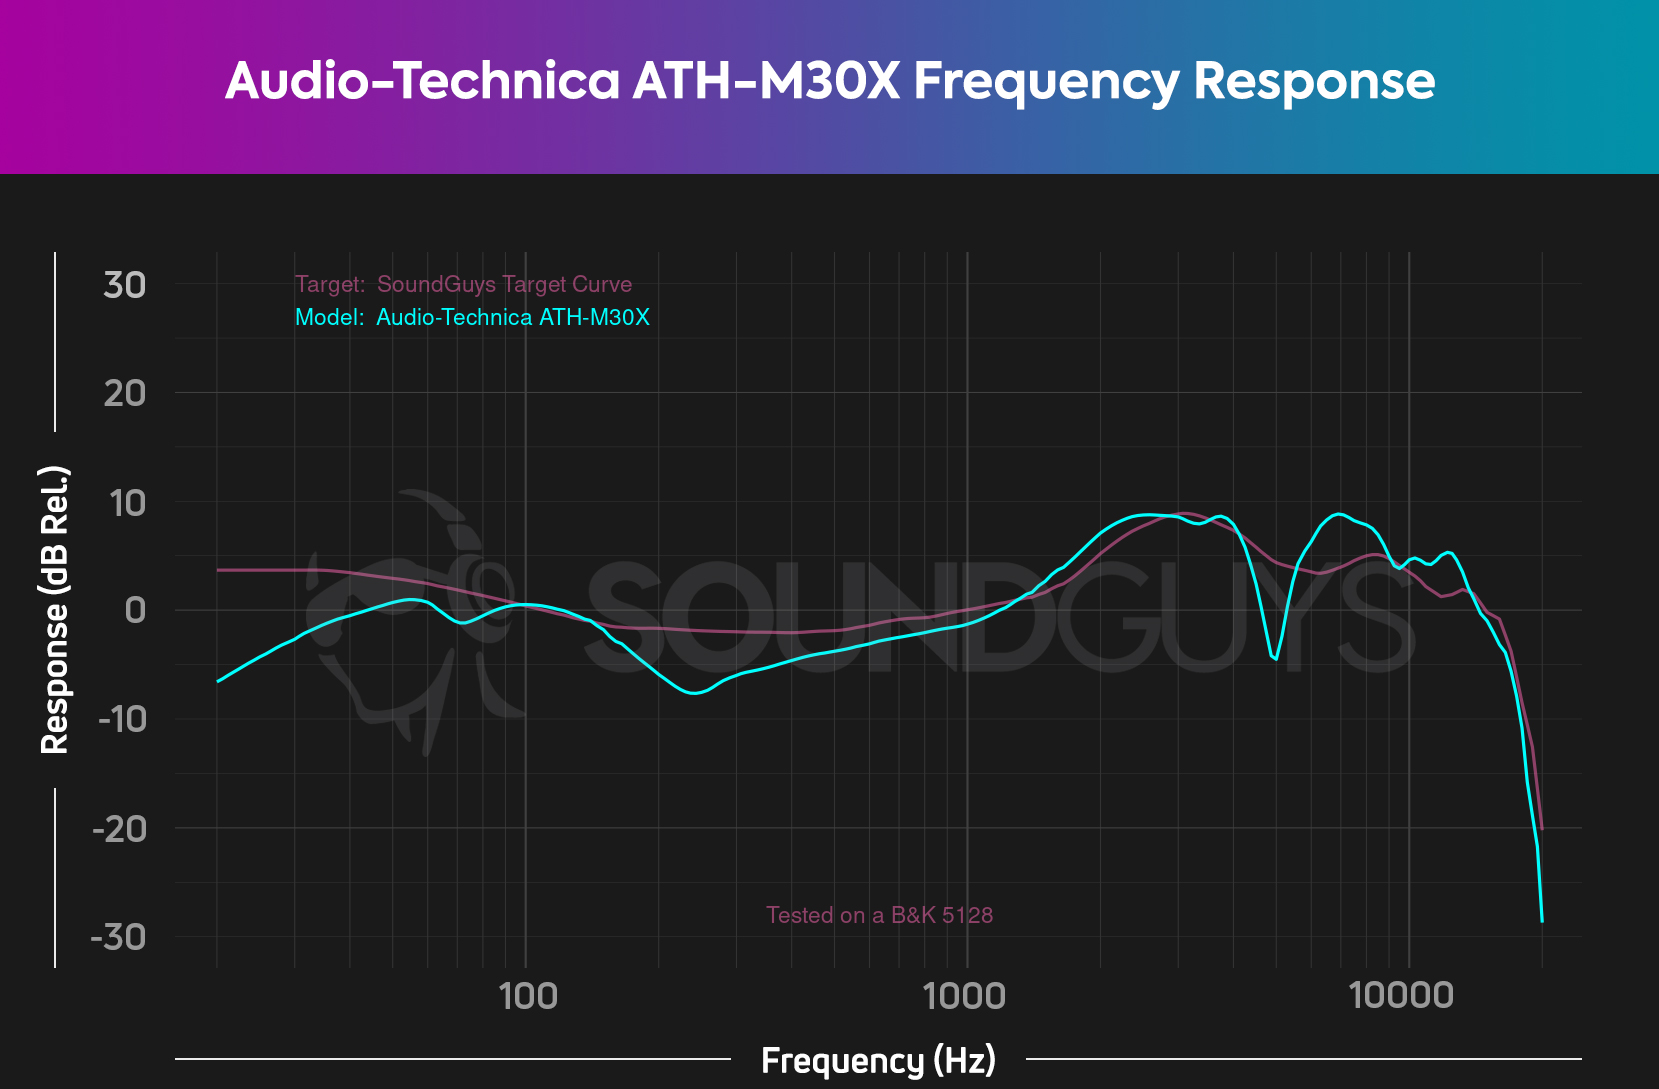 The Audio-Technica ATH-M30x frequency response as measured against the SoundGuys Target Curve.